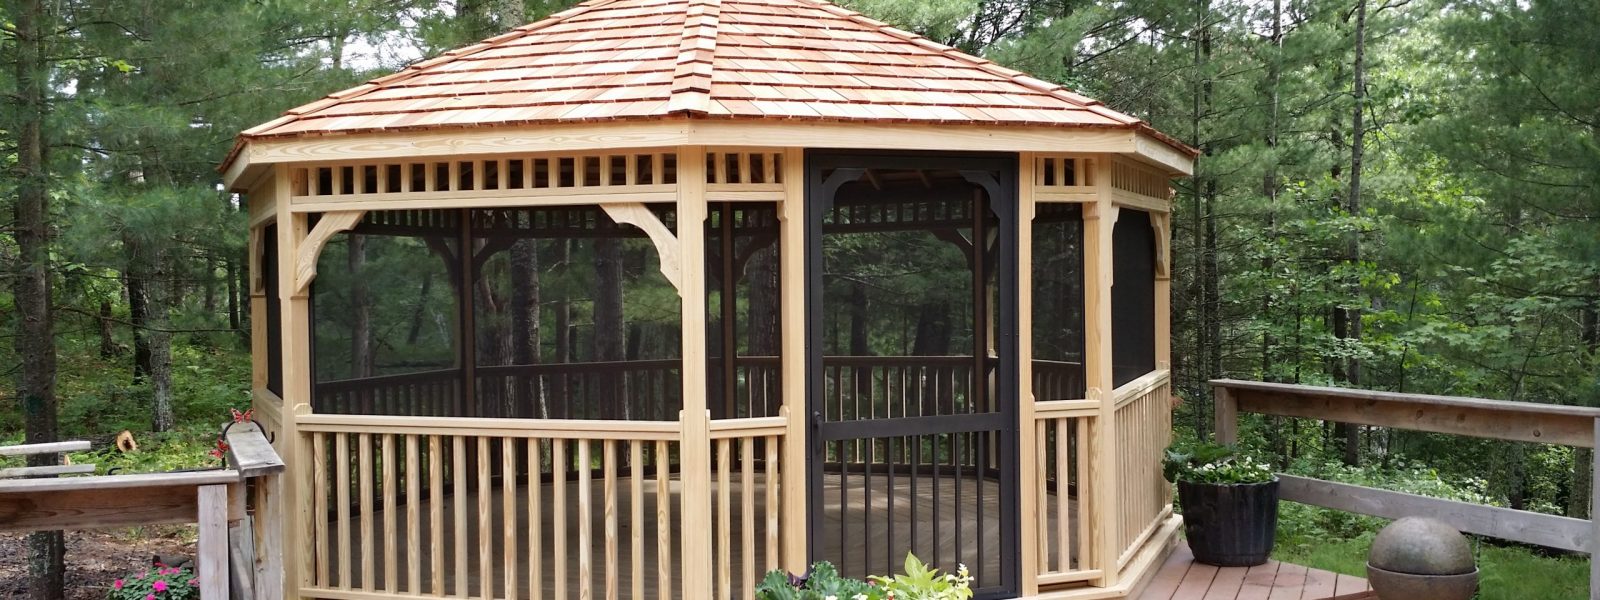 northwood industries screened in gazebo for sale in minnesota and wisconsin